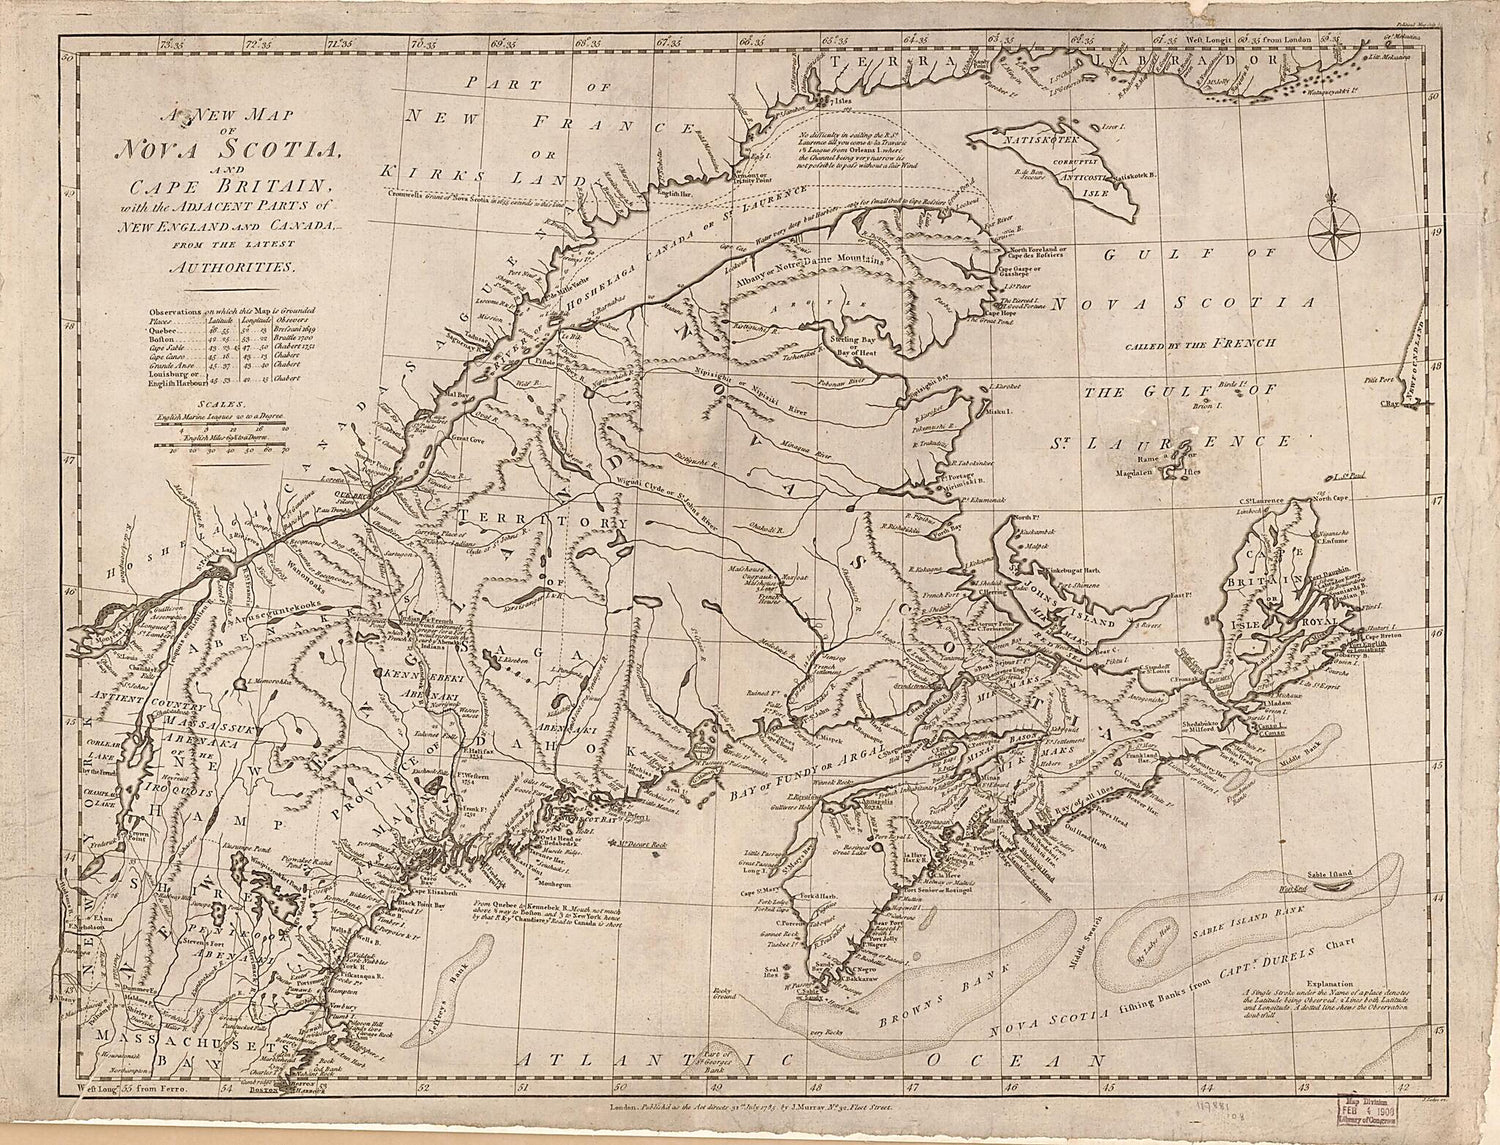 This old map of A New Map of Nova Scotia and Cape Britain, With the Adjacent Part of New England and Canada from the Latest Authorities from 1785 was created by John Lodge, John Murray in 1785